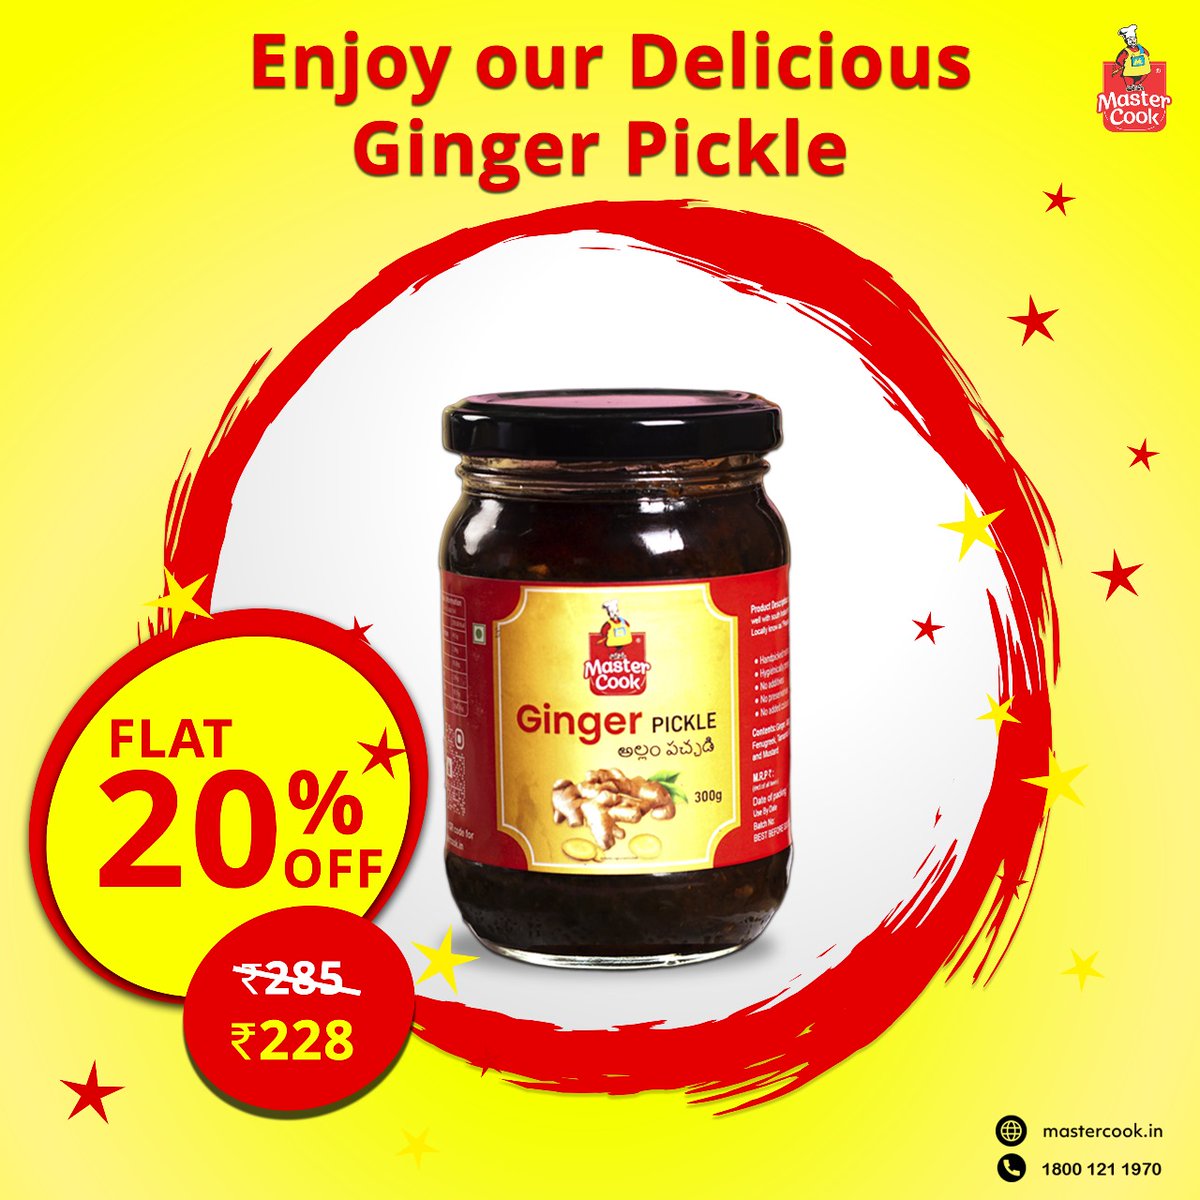 This Summer, Spice up your meal with a punch of our Ginger Pickle!😋 Have you grabbed our 20% discount yet? Check it out in our bio!👀✨ #FlavorExploration #pickle #mastercook #SavingsAlert #pickles #discounts #SaleAlert #offers #discountedprice